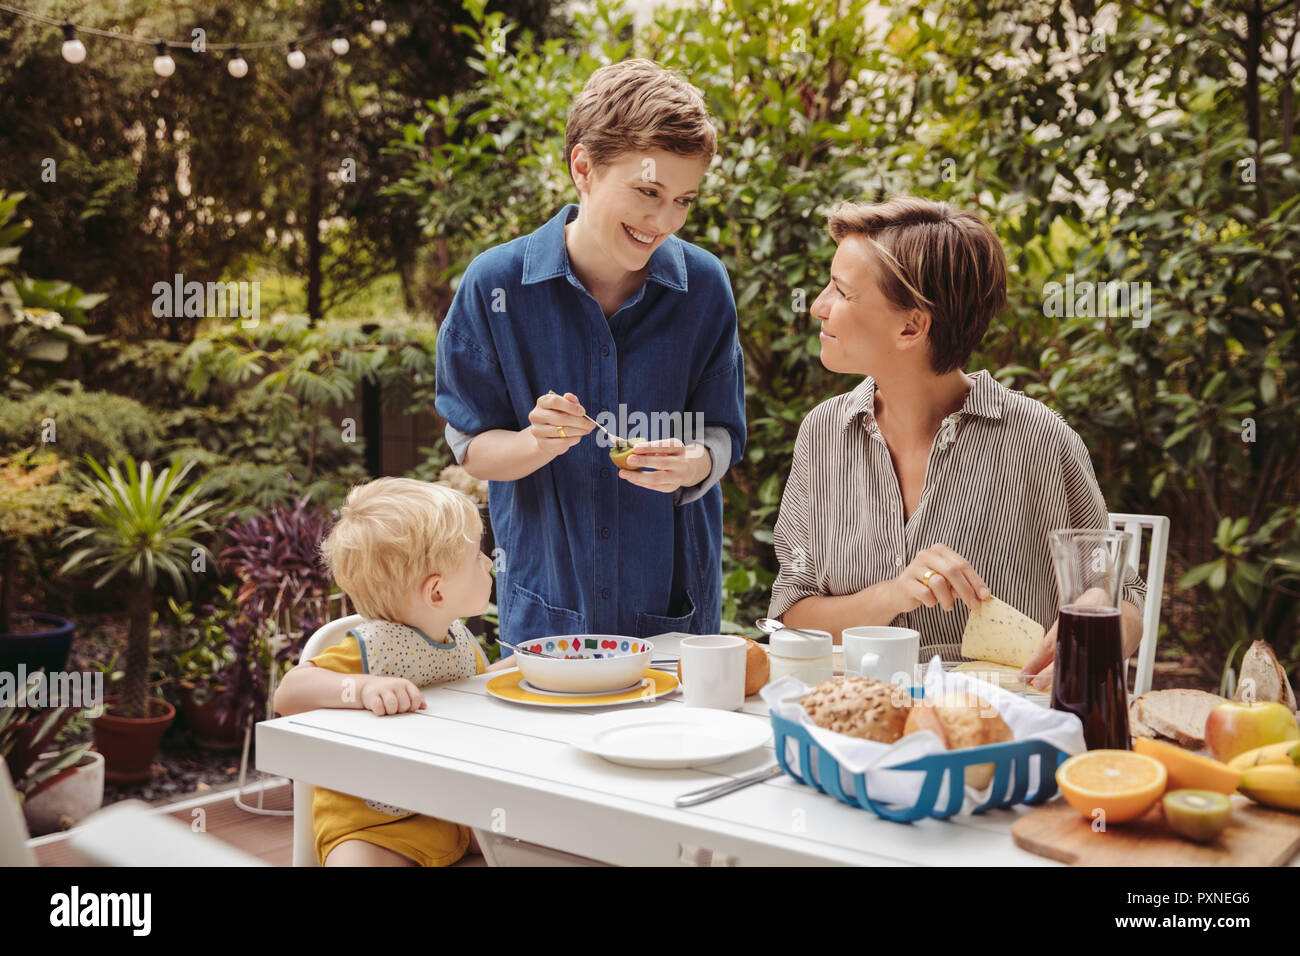 Two happy mothers at breakfast table outdoors with their child Stock Photo